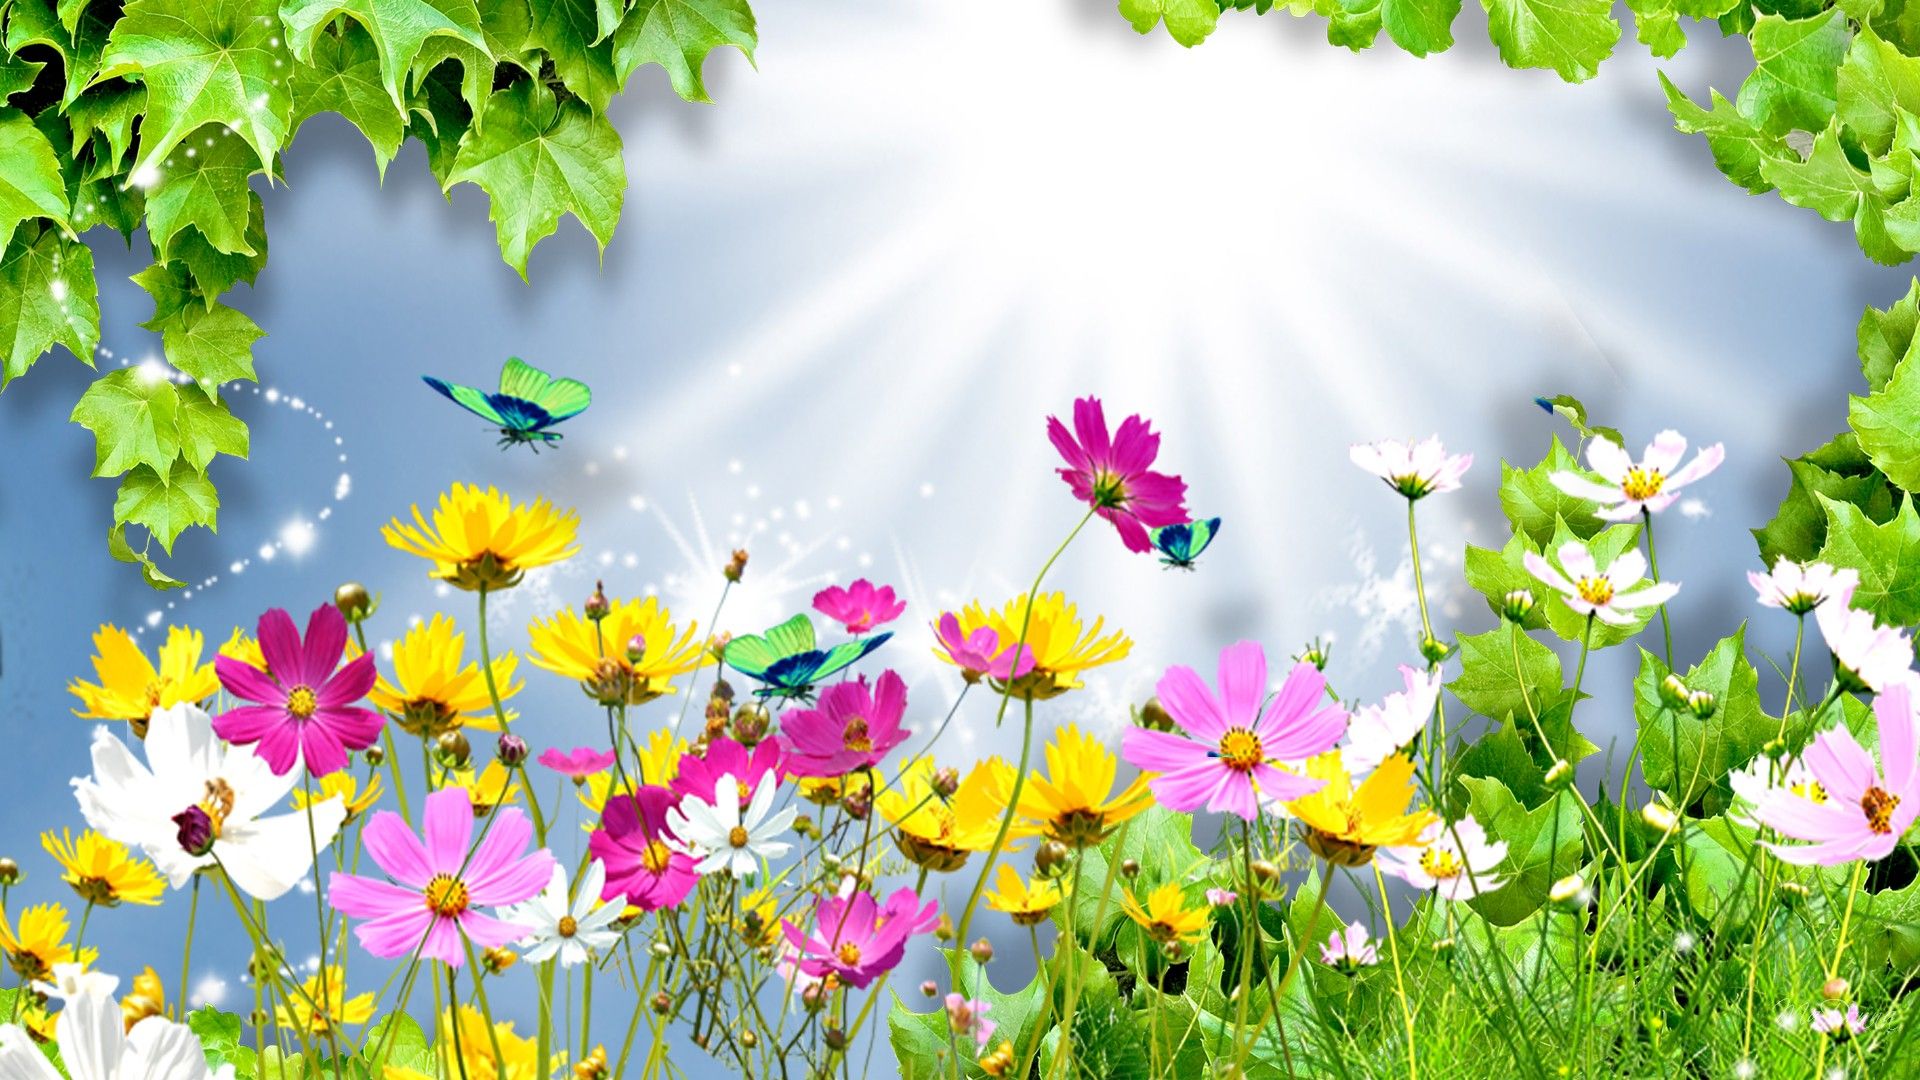 HD wallpaper, Flowers, Summer, Animated